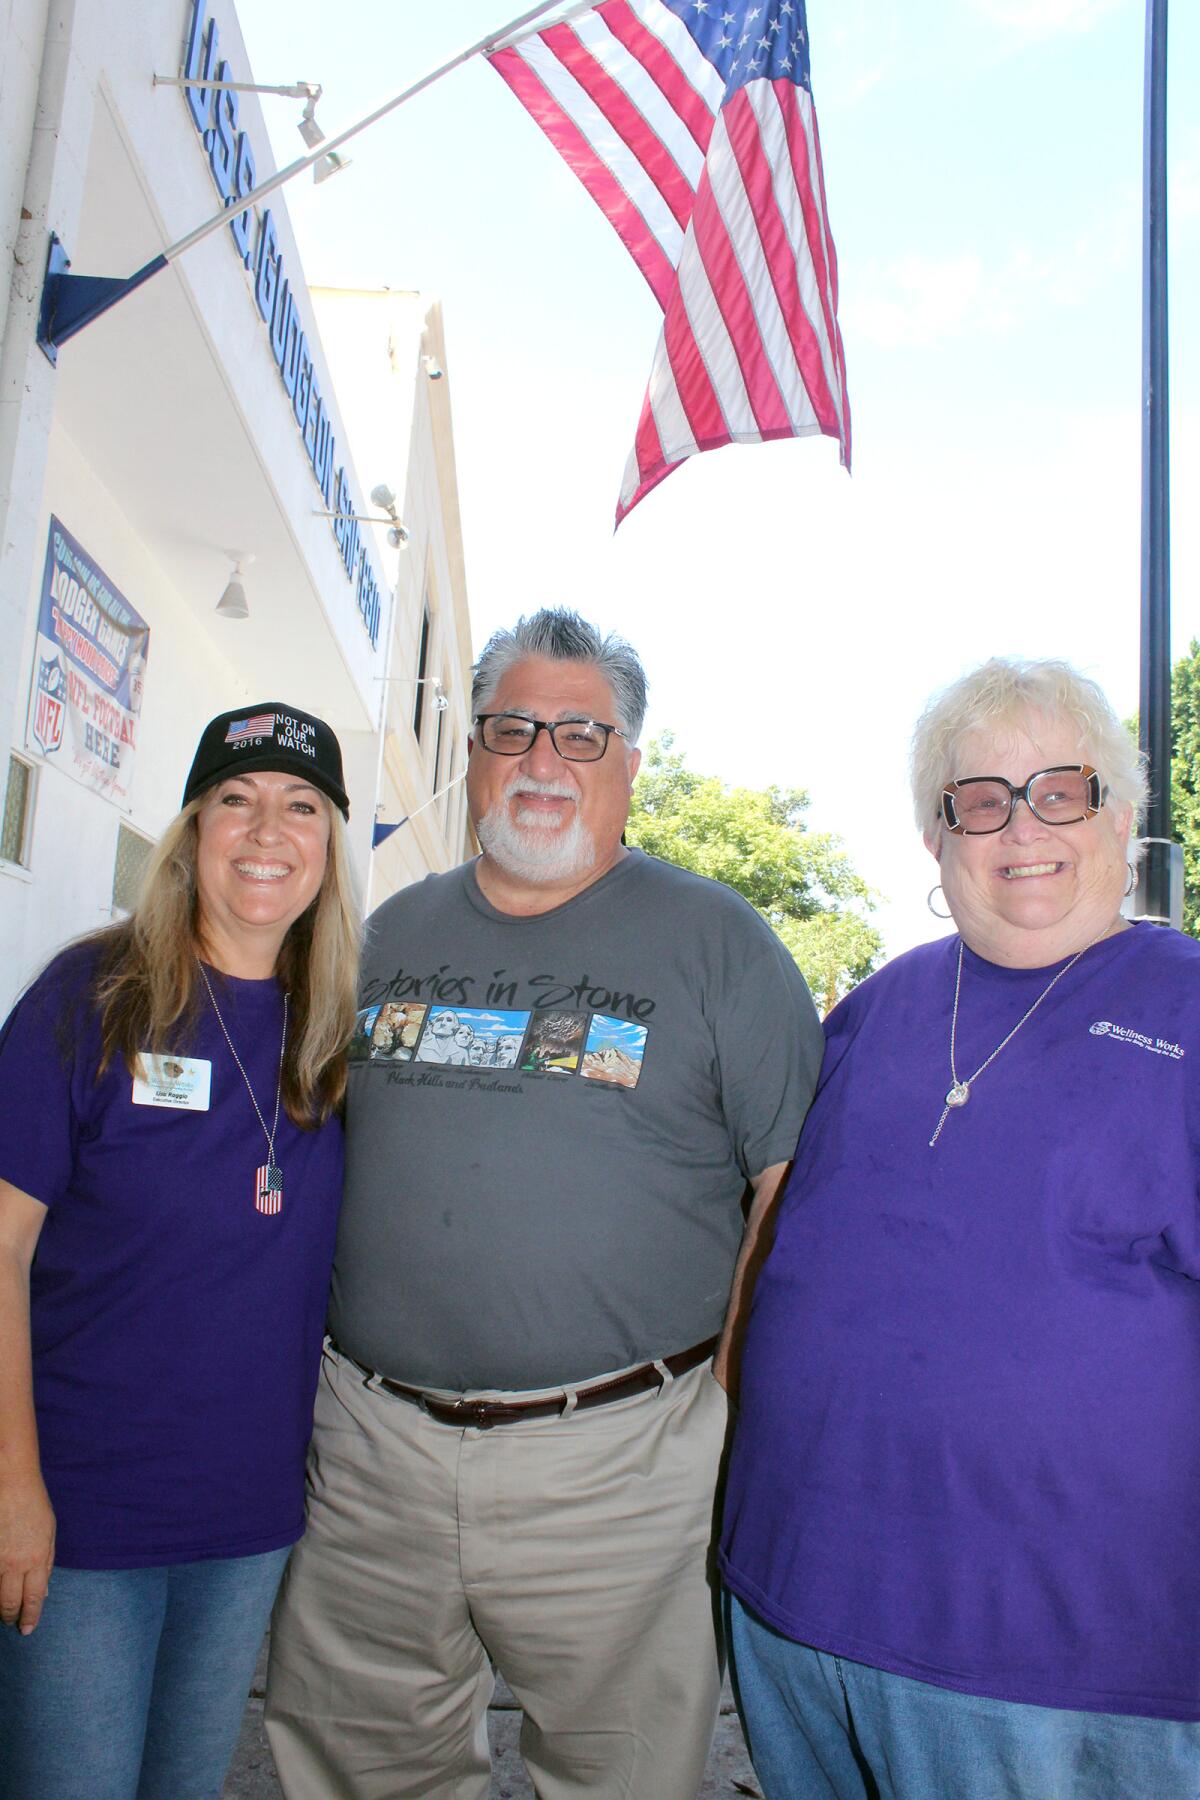 Enjoying the company are, from left, Wellness Works Executive Director Lisa Raggio, State Sen. Anthony Portantino and U.S. Air Force vet Kathy Kensinger.